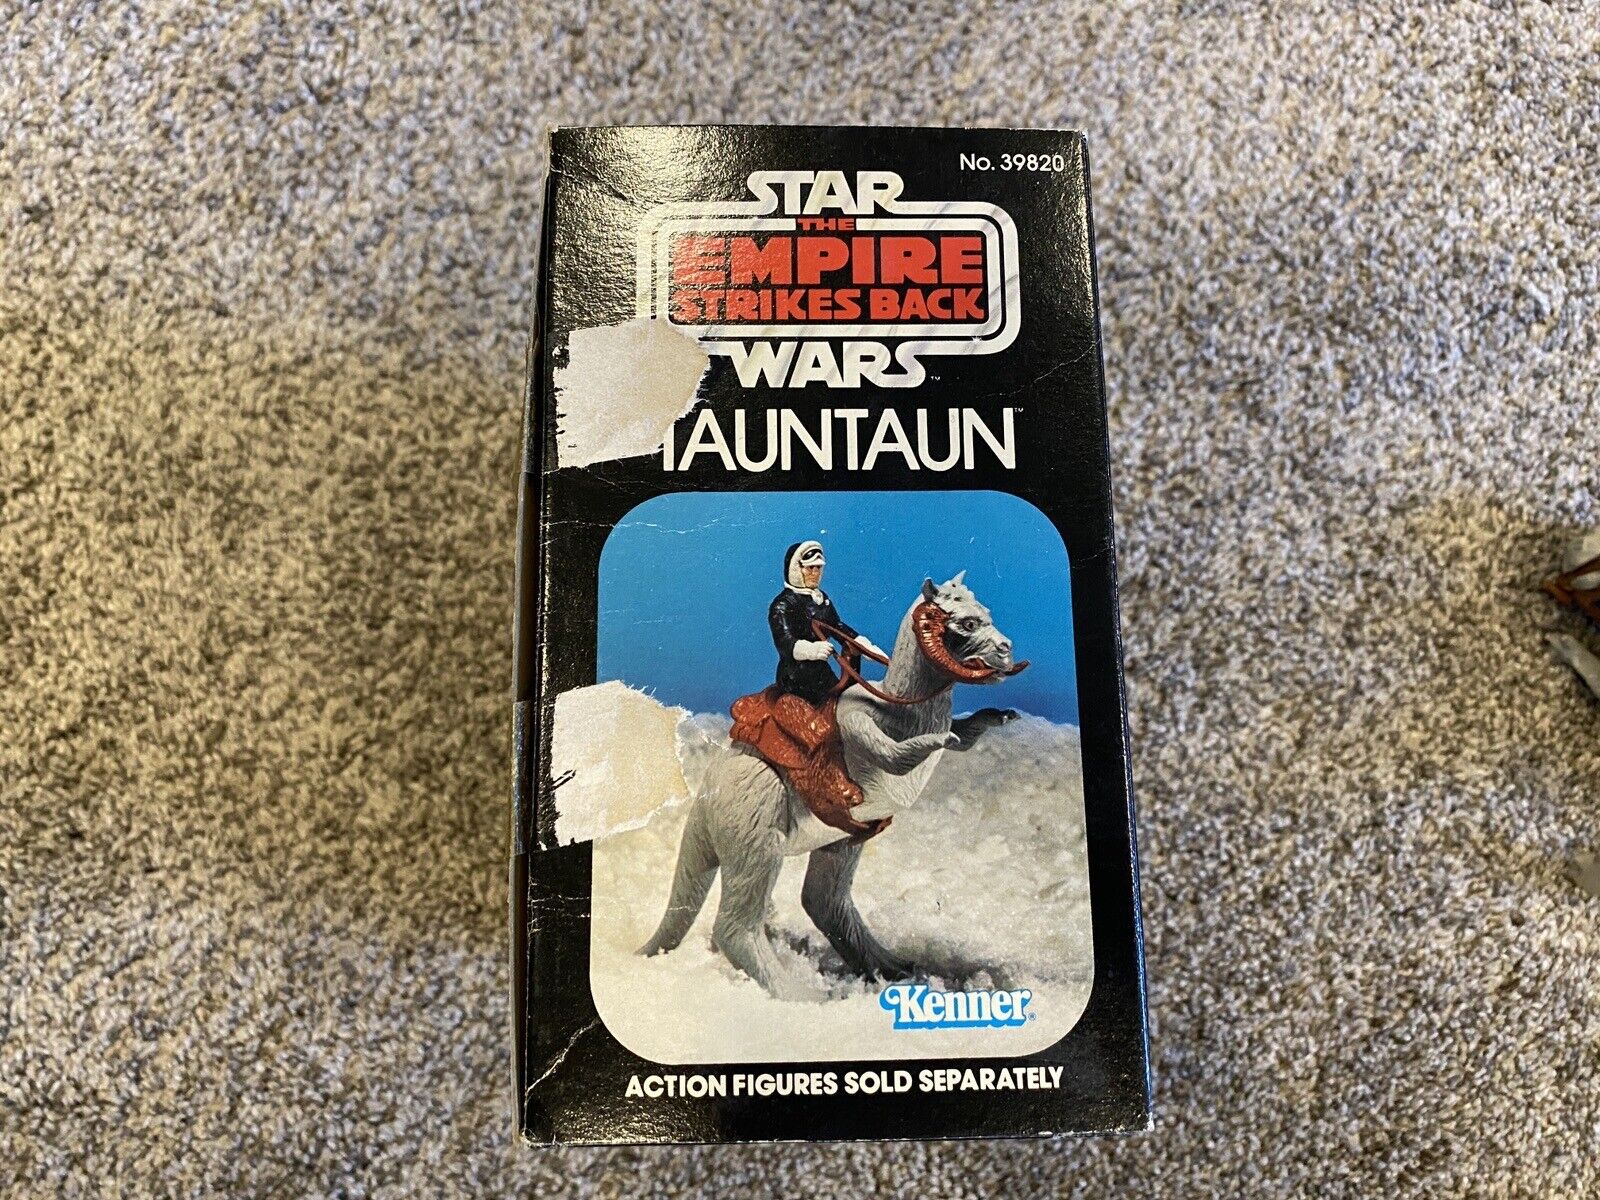 Tauntaun (closed belly) sold